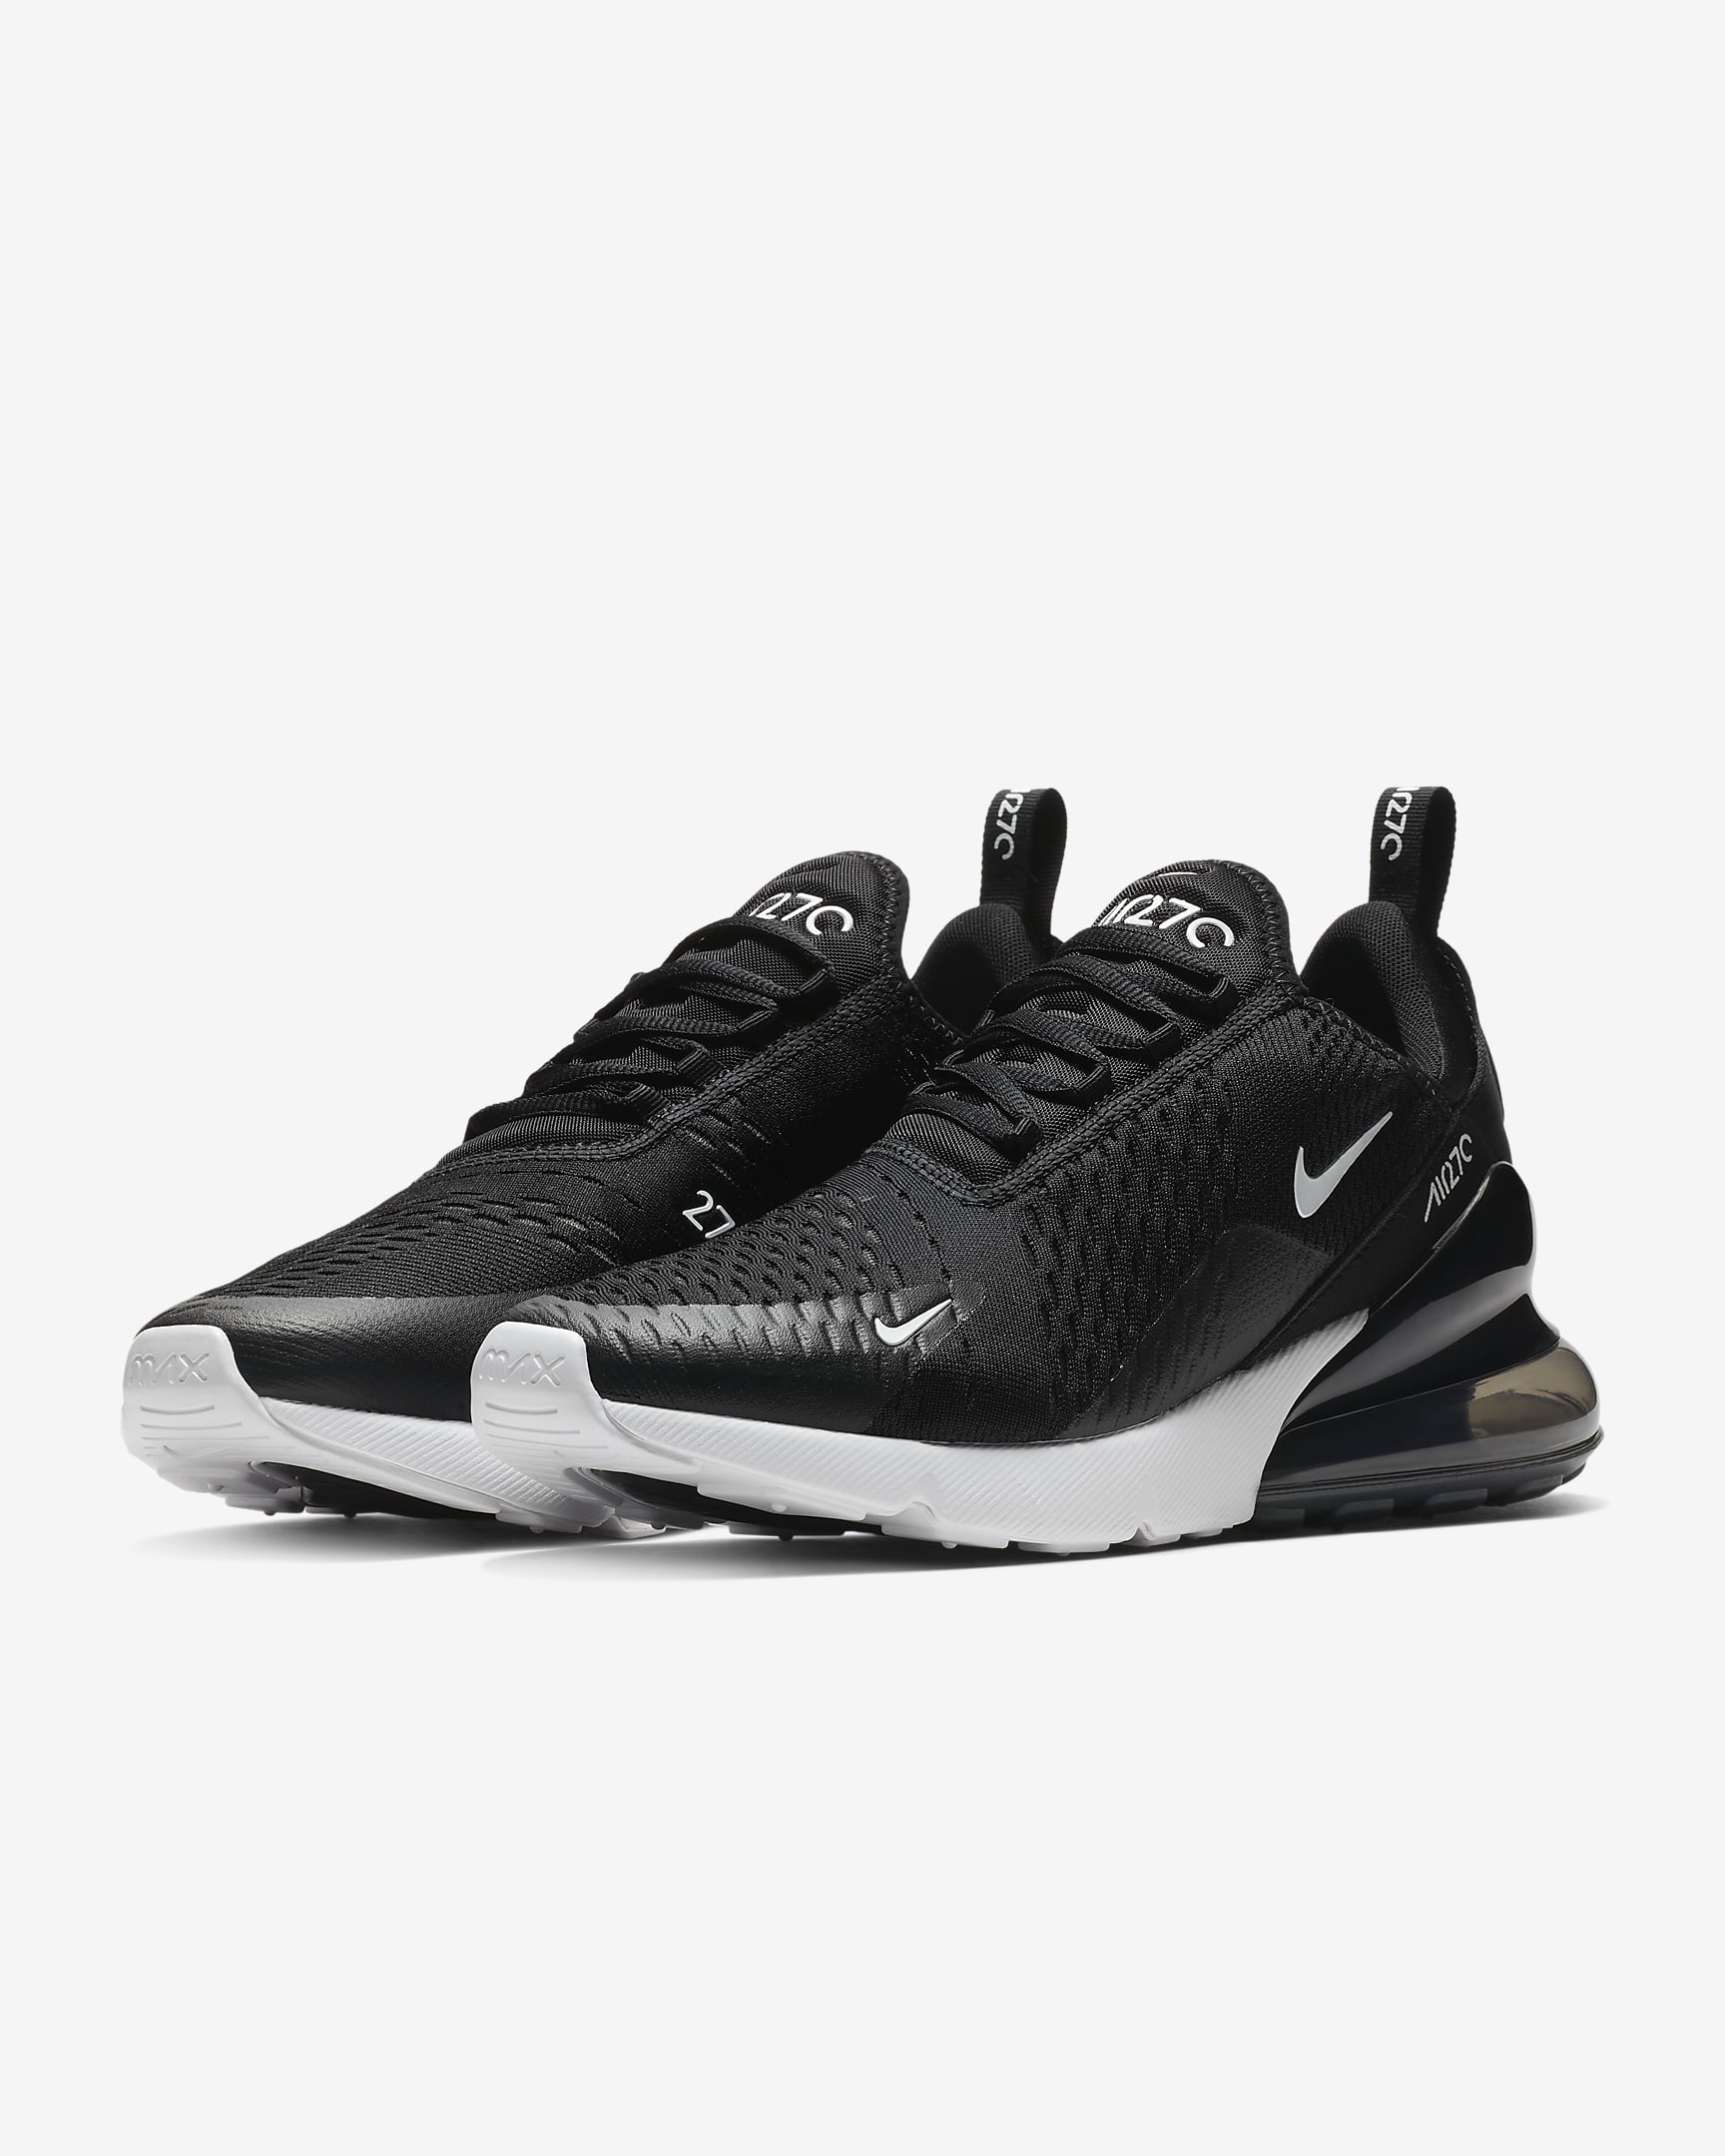 Nike Air Max 270 Women's Shoes - Black/White/Anthracite